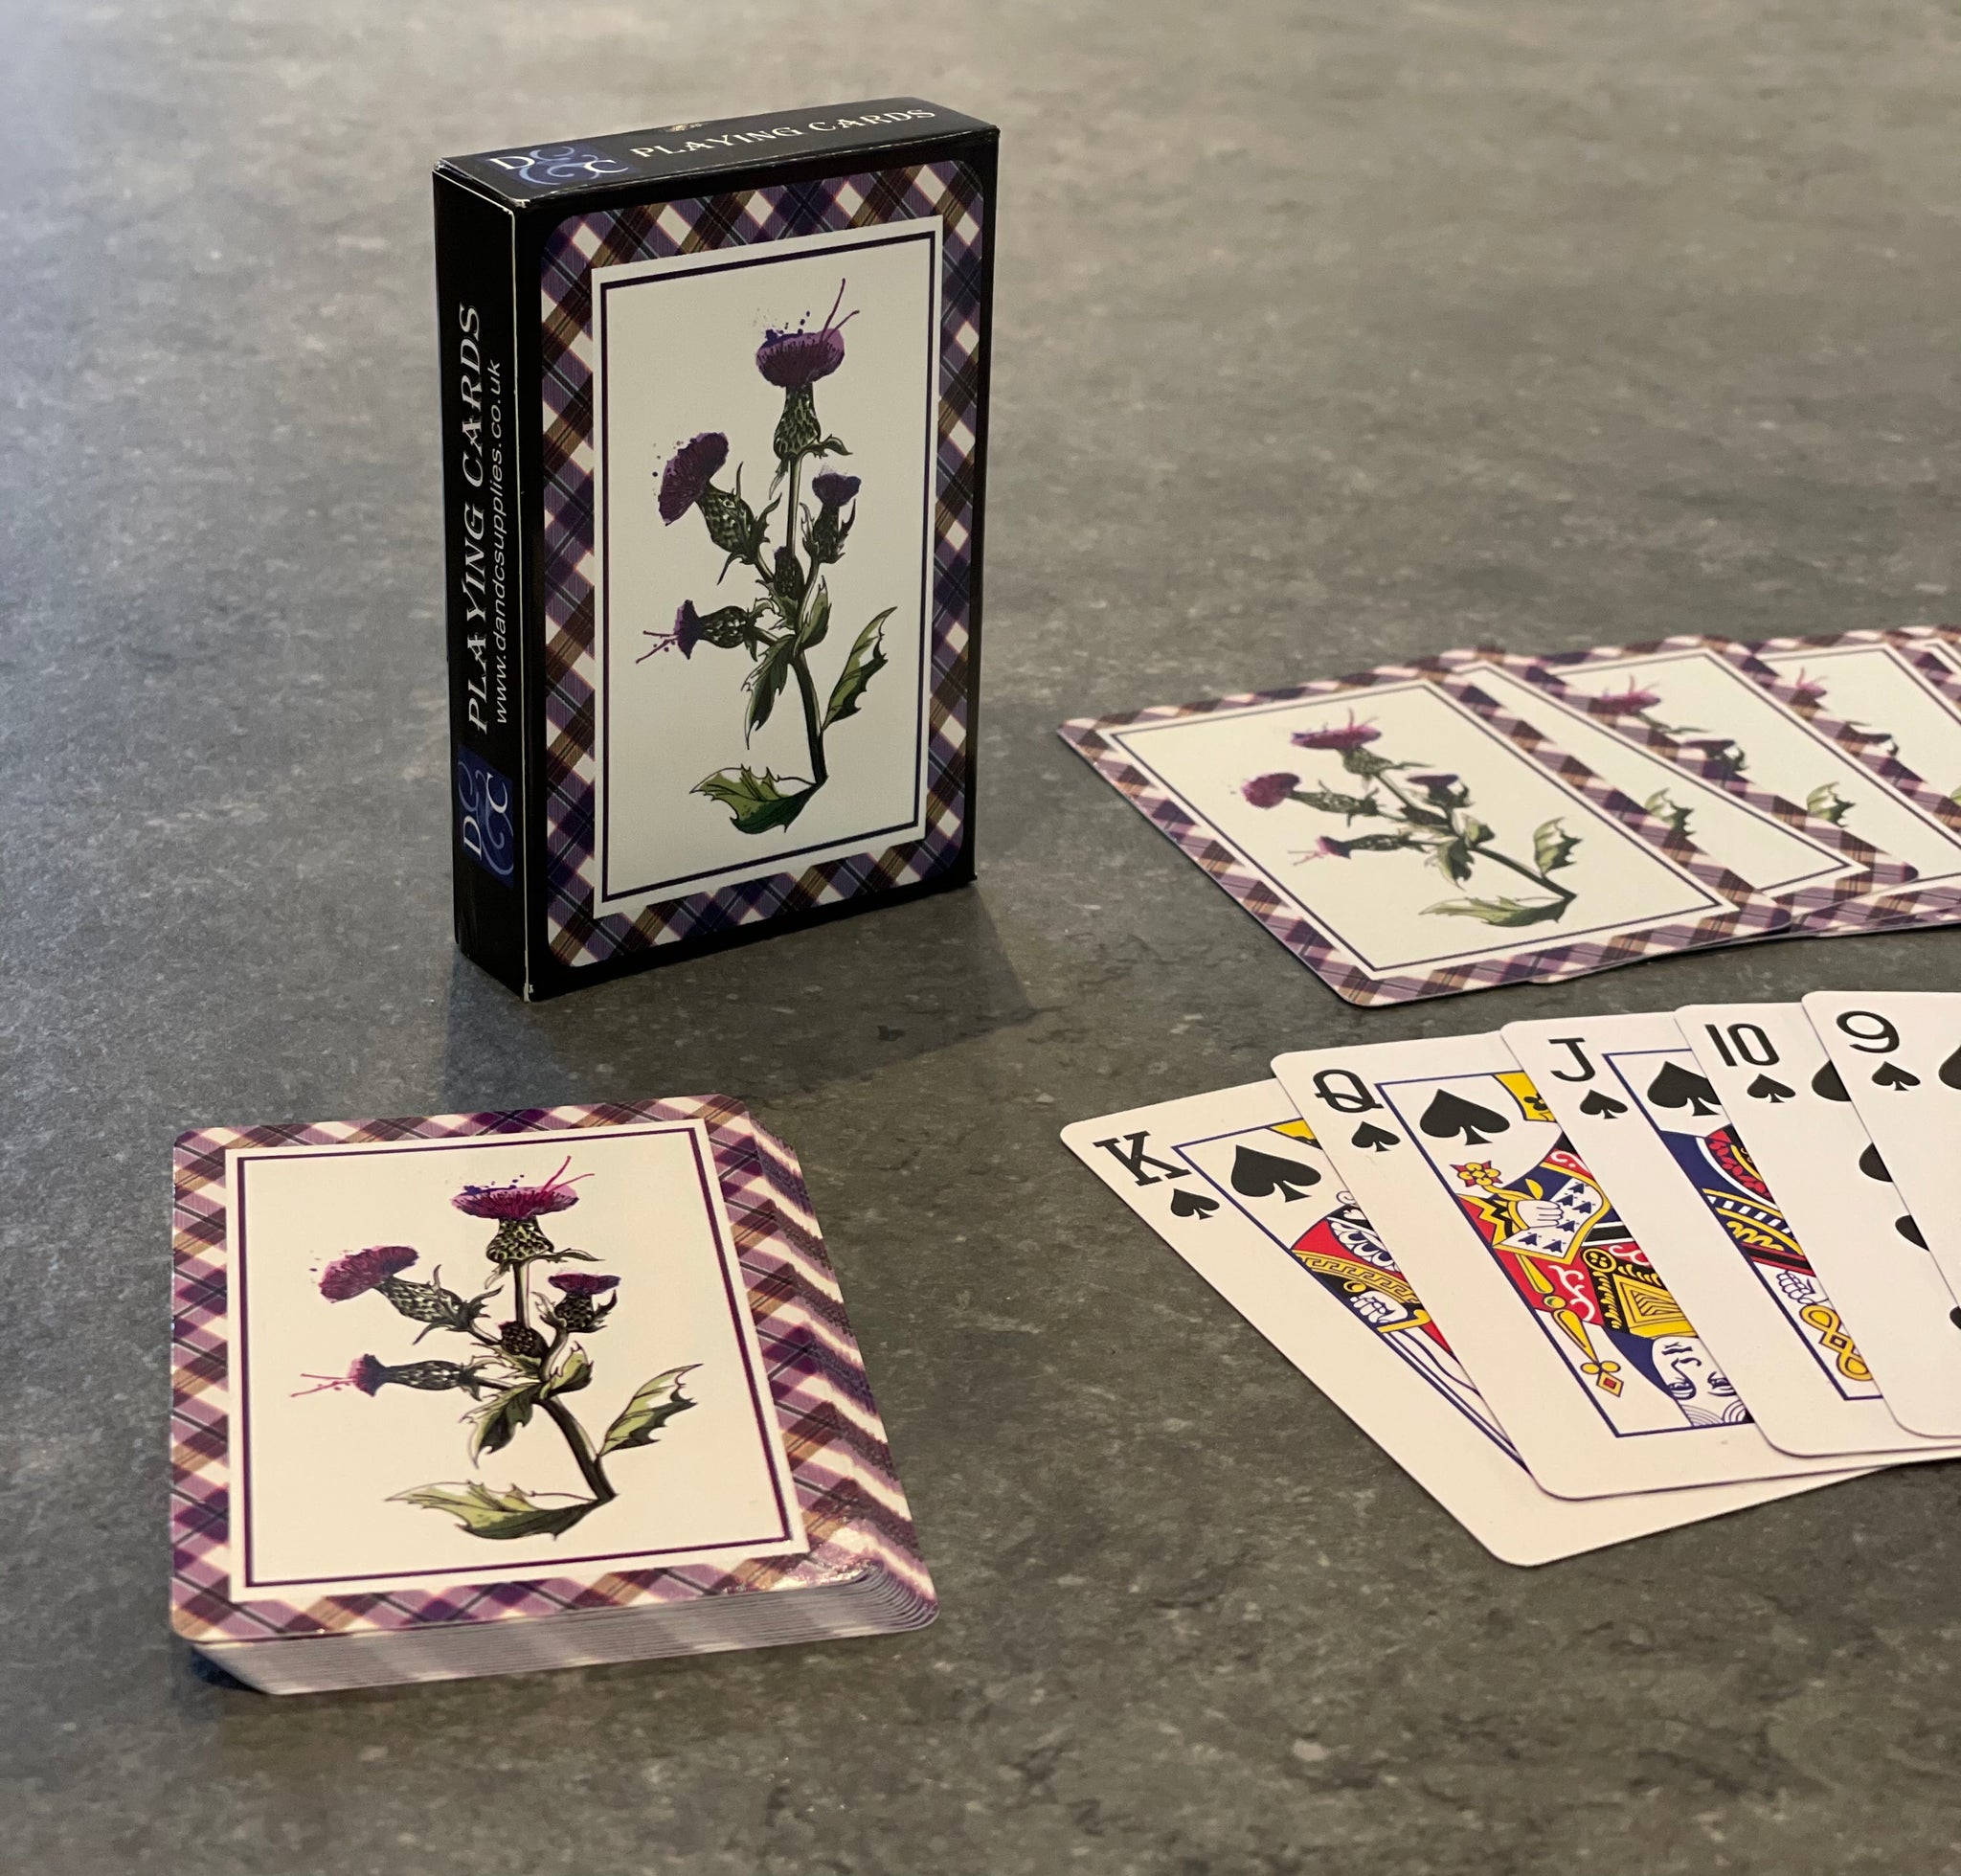 Playing Cards Wild Thistle design